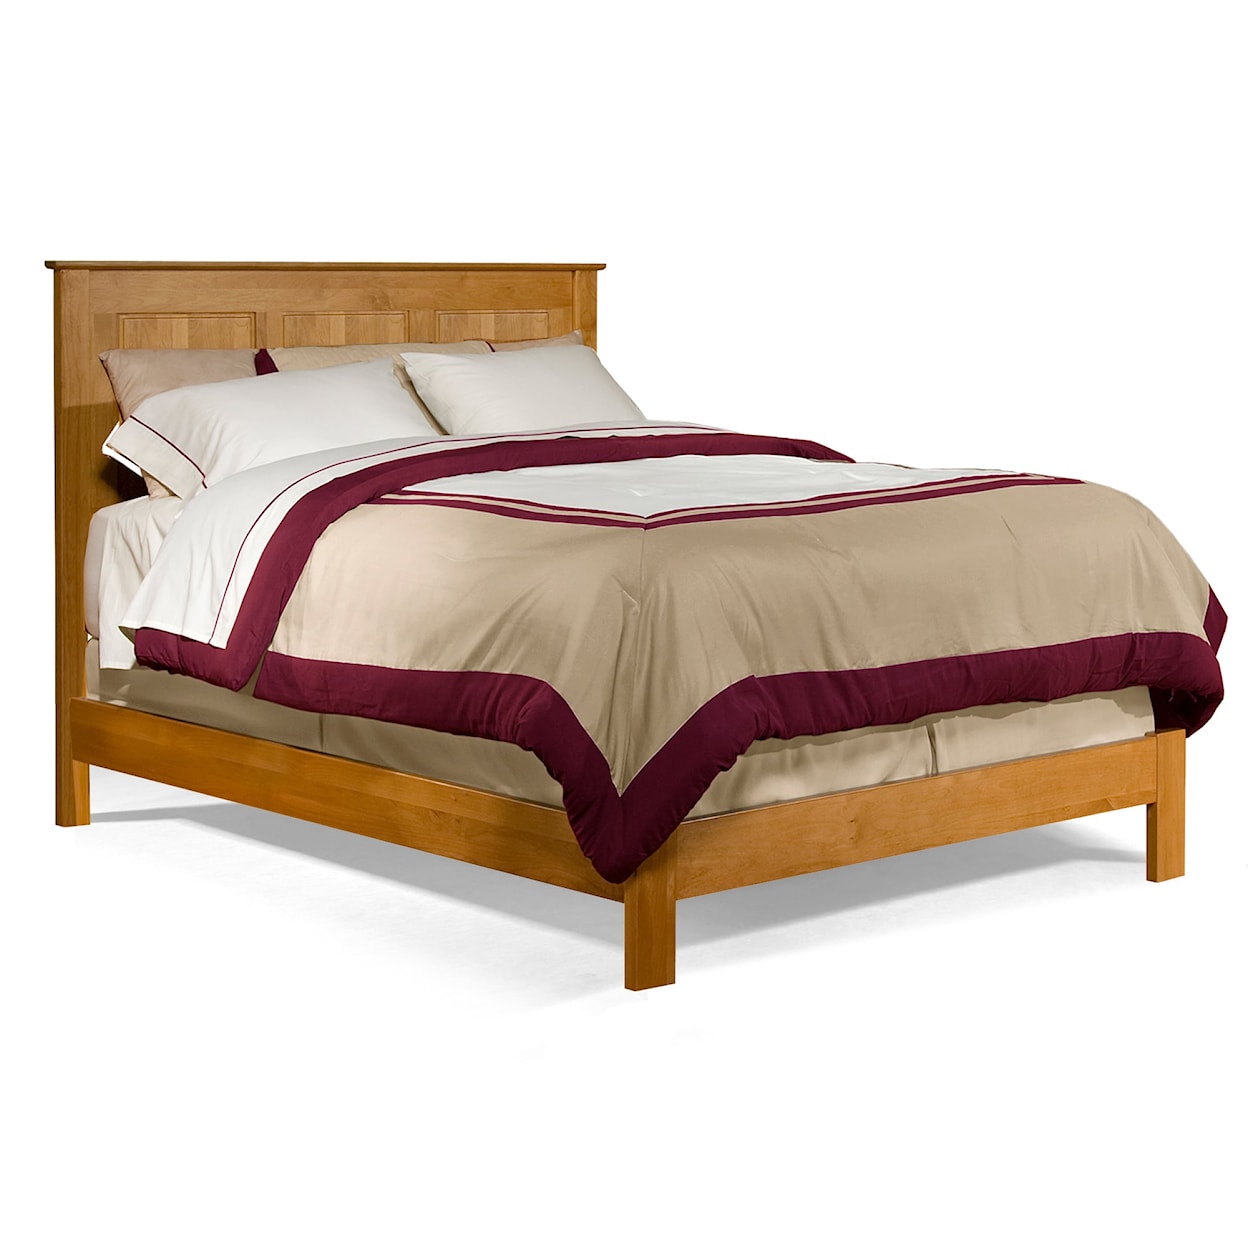 Archbold Furniture Beds Full Essential Panel Bed